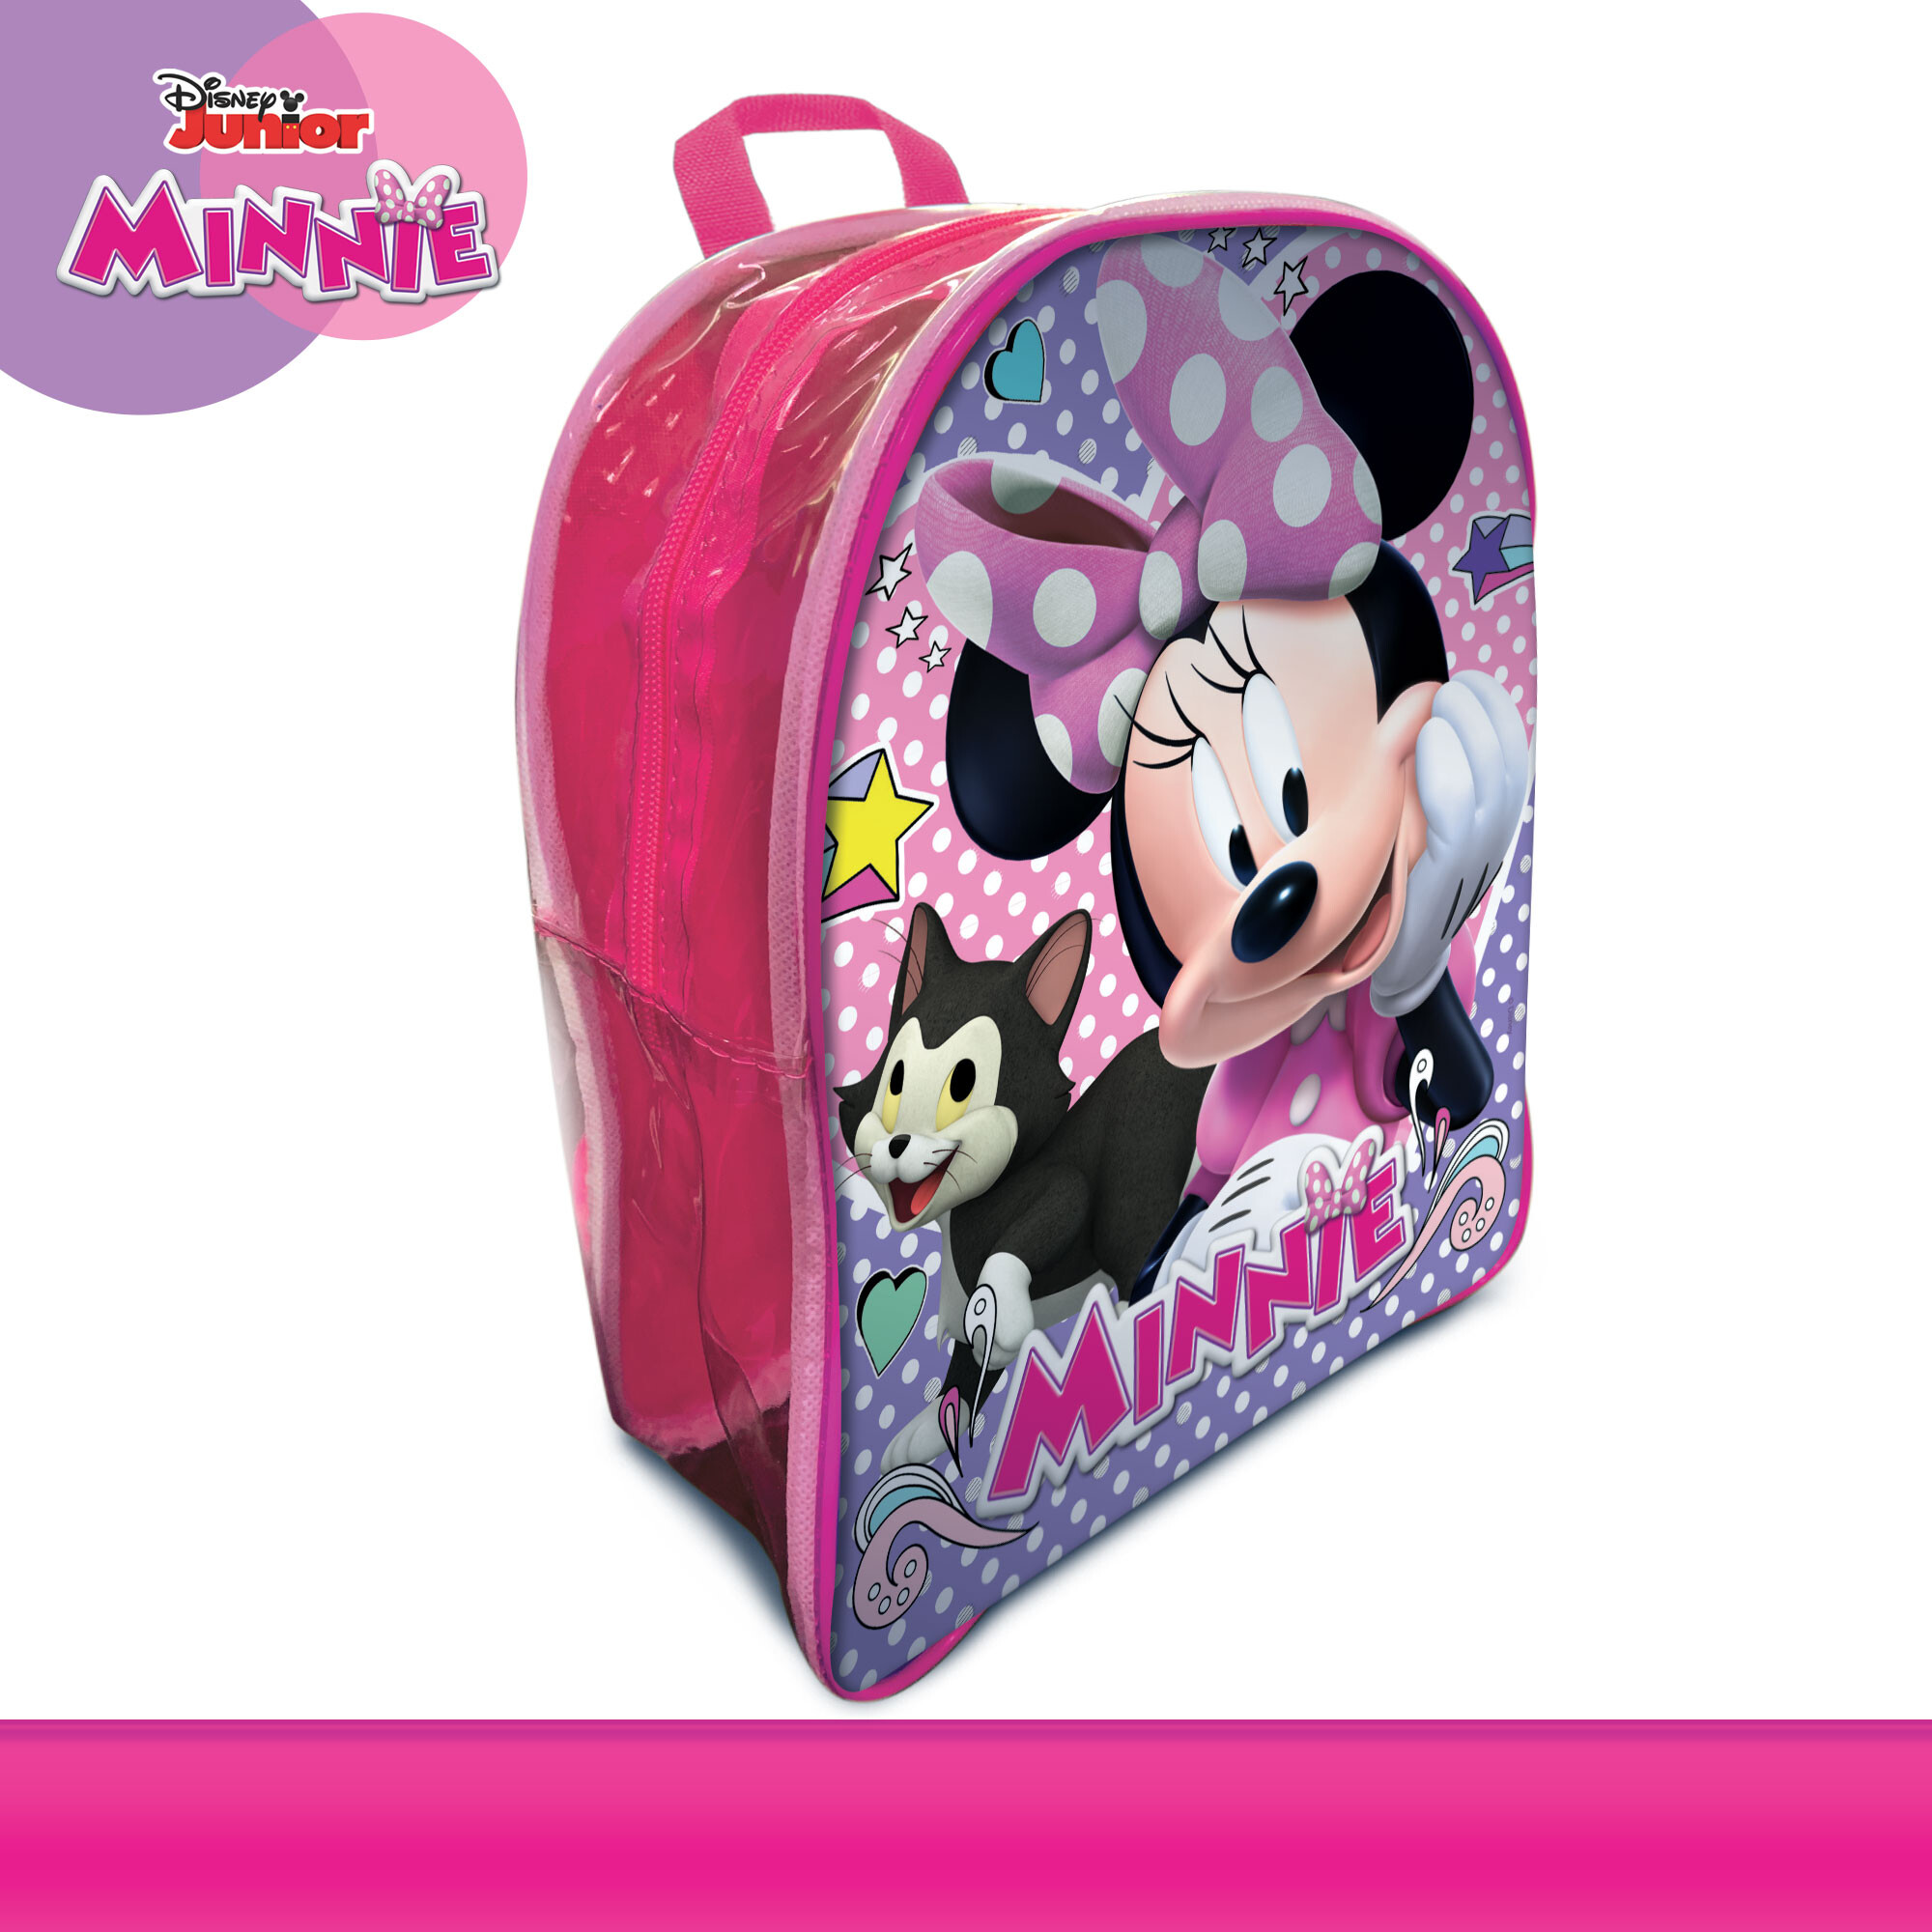 Minnie zainetto coloring and drawing school - 245, LISCIANI